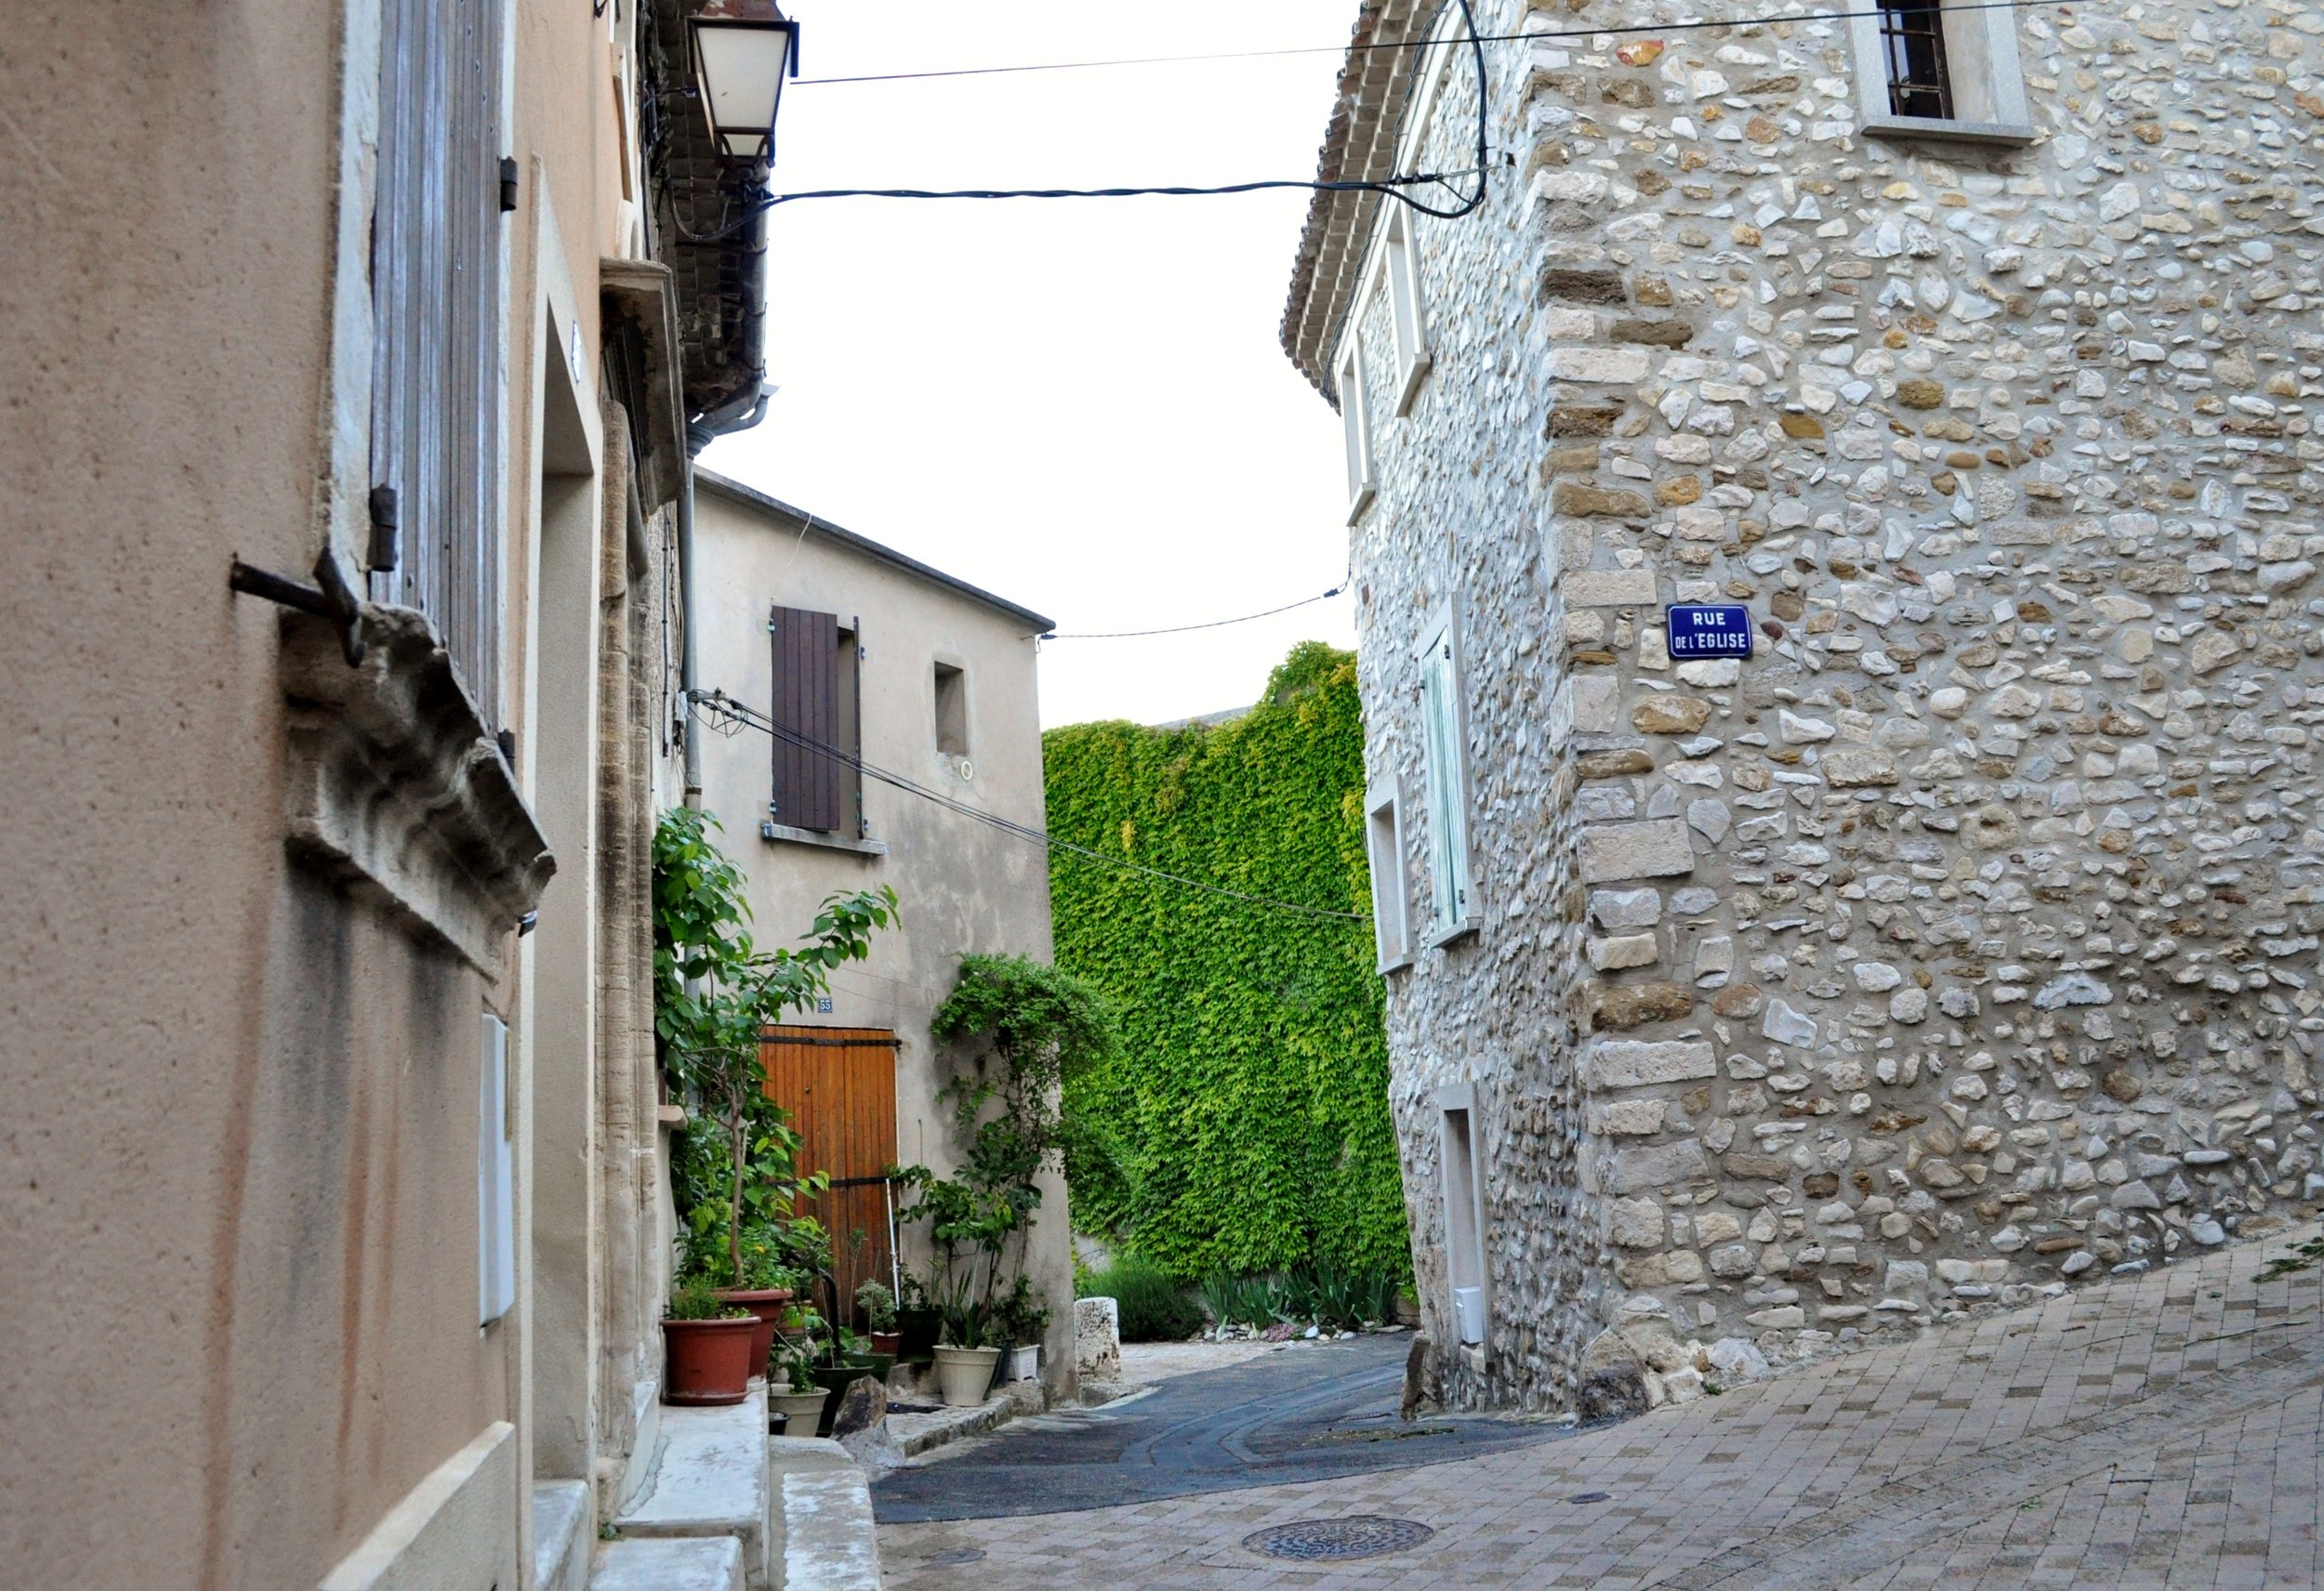 The winding streets of Sablet